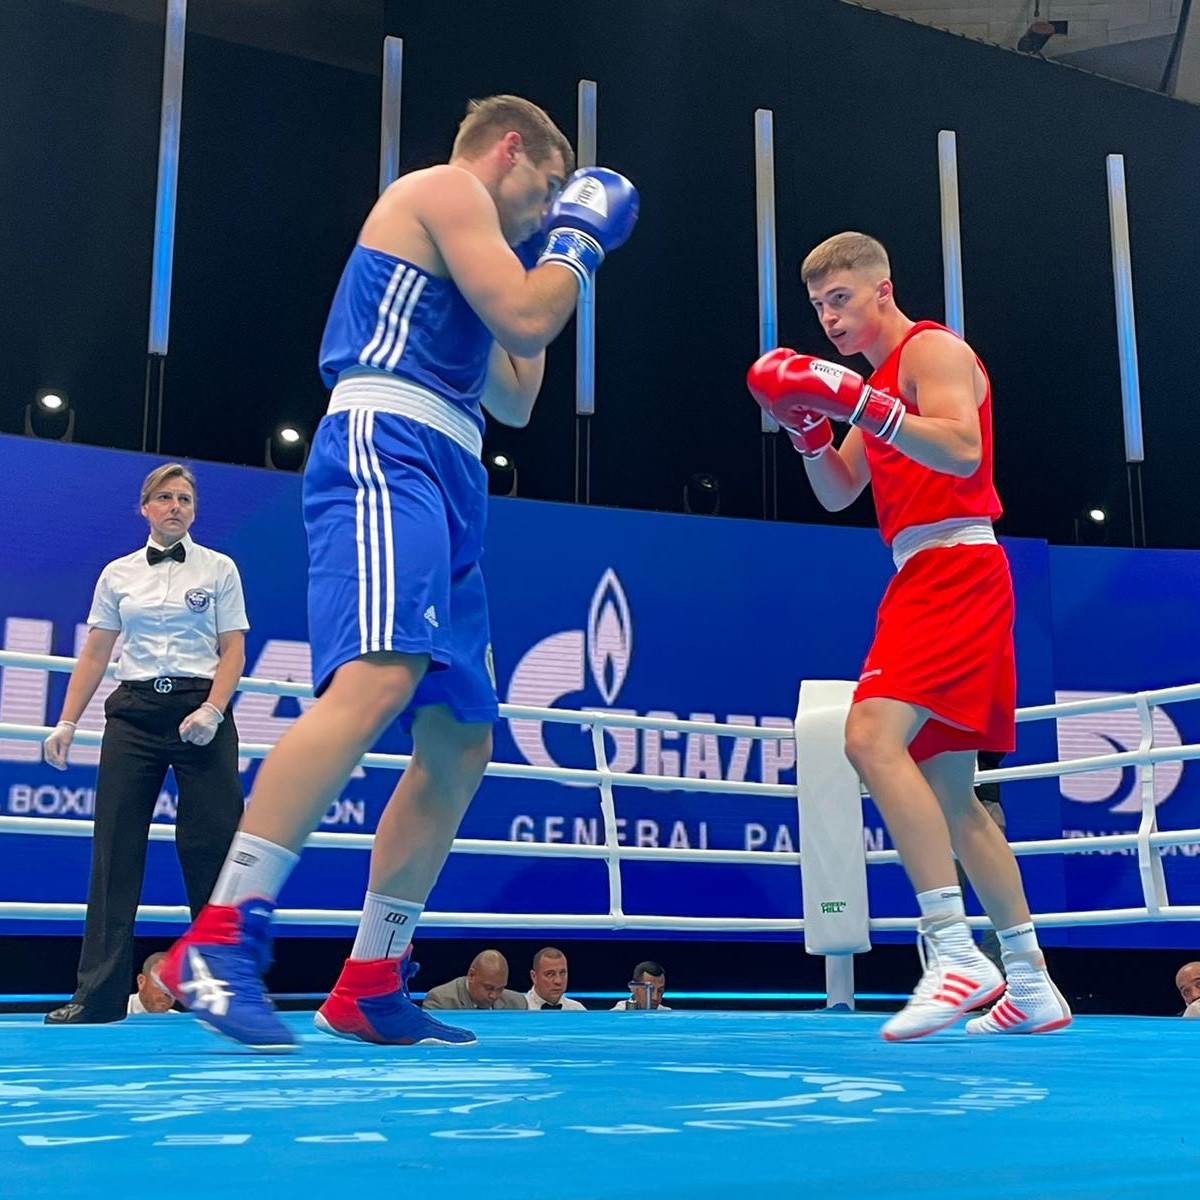 Taylor Bevan, right, beat Sweden's Lindon Nuha in the light-heavyweight division ©GB Boxing/Twitter